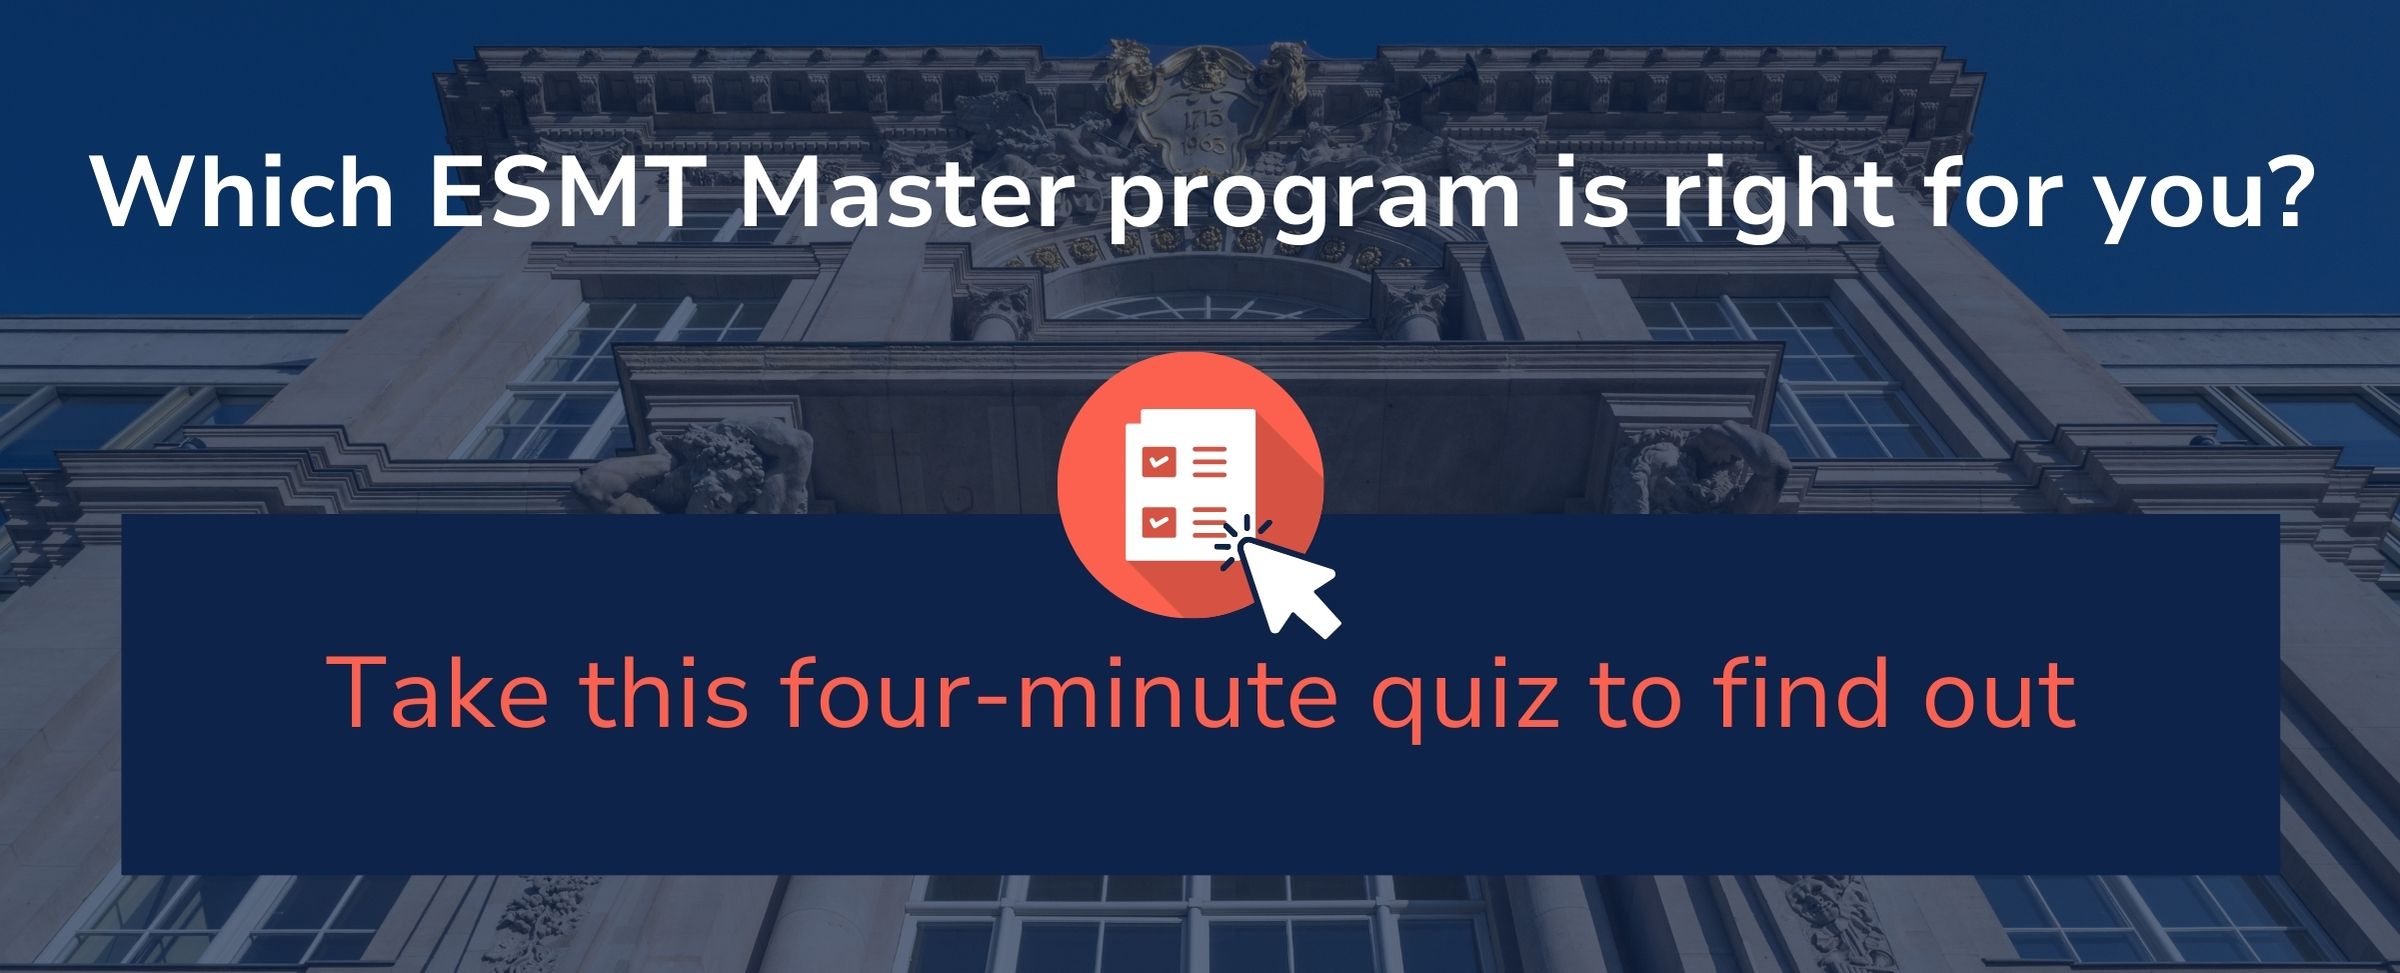 Which ESMT Master program is right for you? Take this quiz to find out. Image link